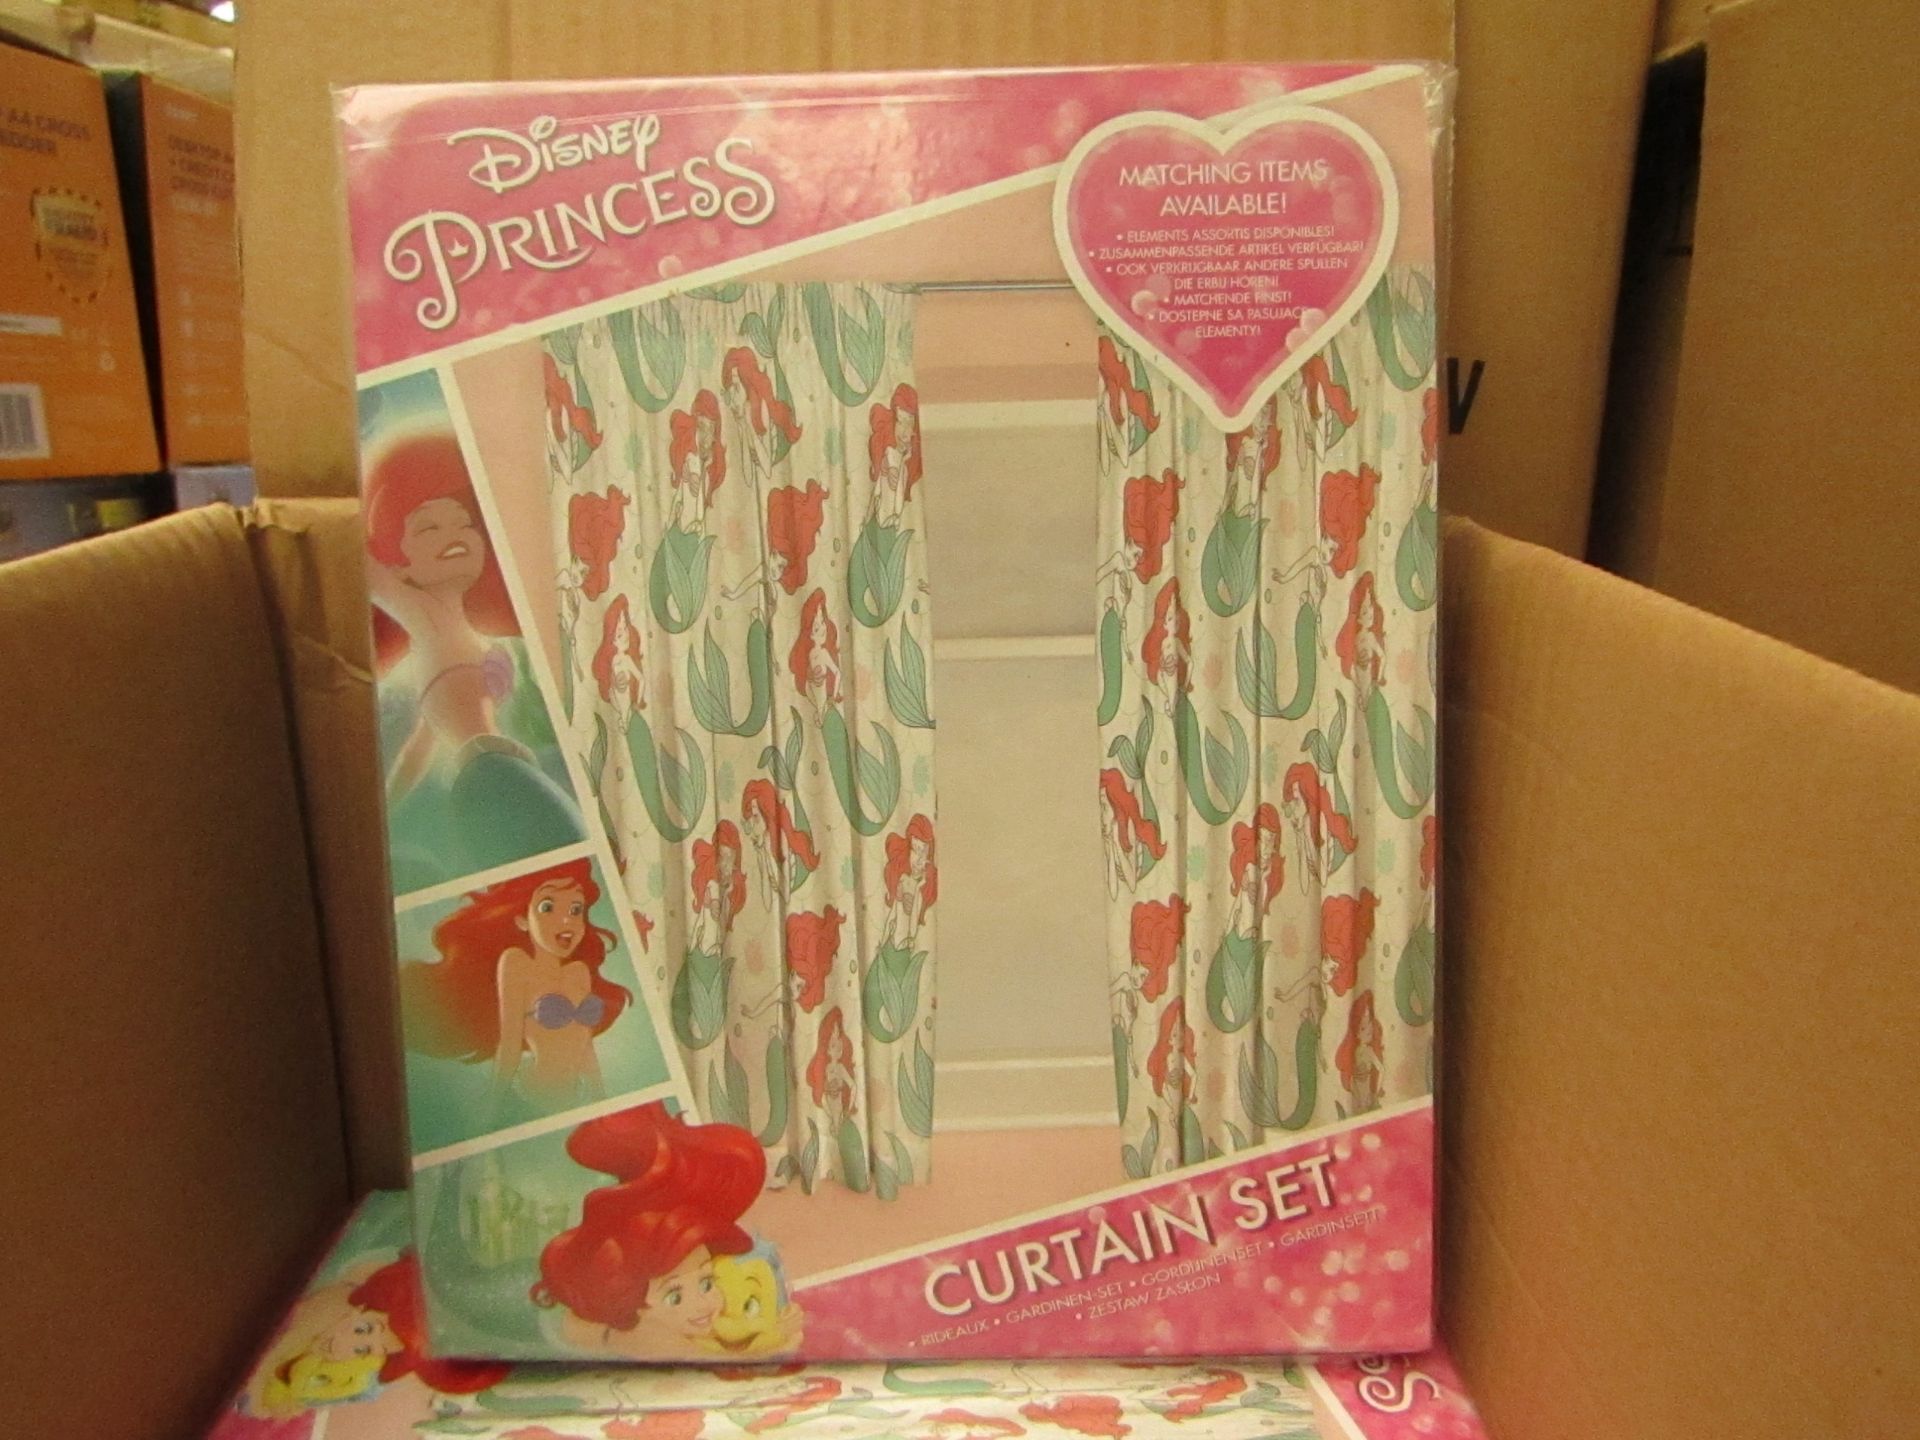 3 x Disney Princess Curtain Set 66" x 54" without Tie Backs - New & Packaged